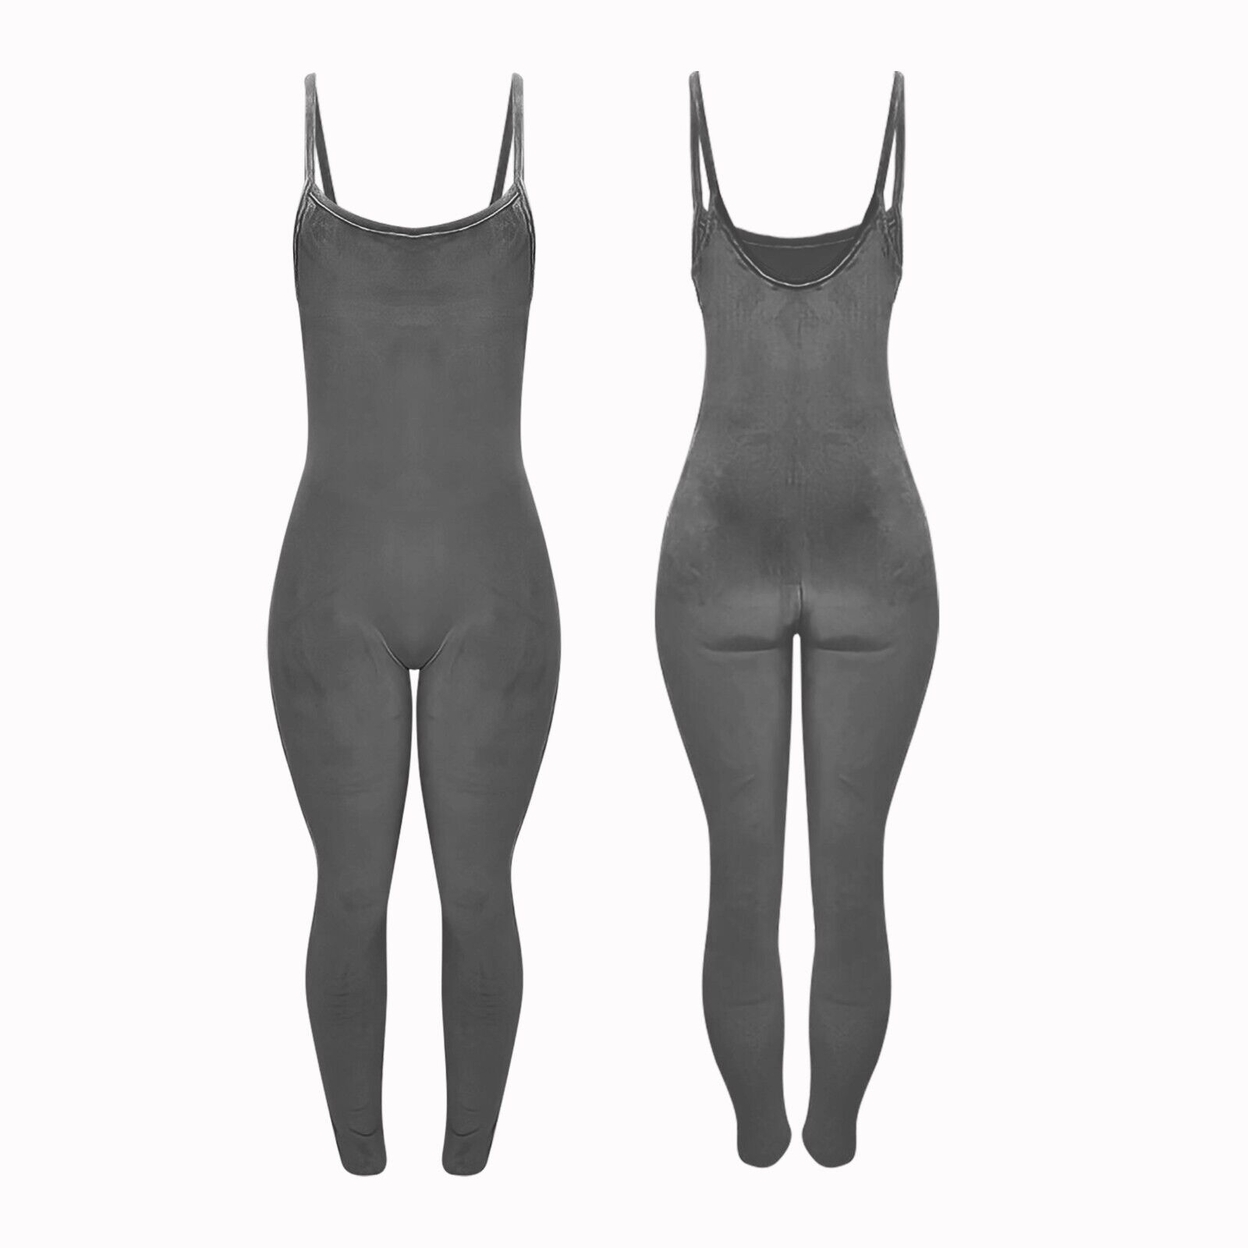 2-Pack Women Ultra-Soft Comfy Smooth Sleeveless Spaghetti Strap Velvet Body Jumpsuit - Black & Charcoal, Small